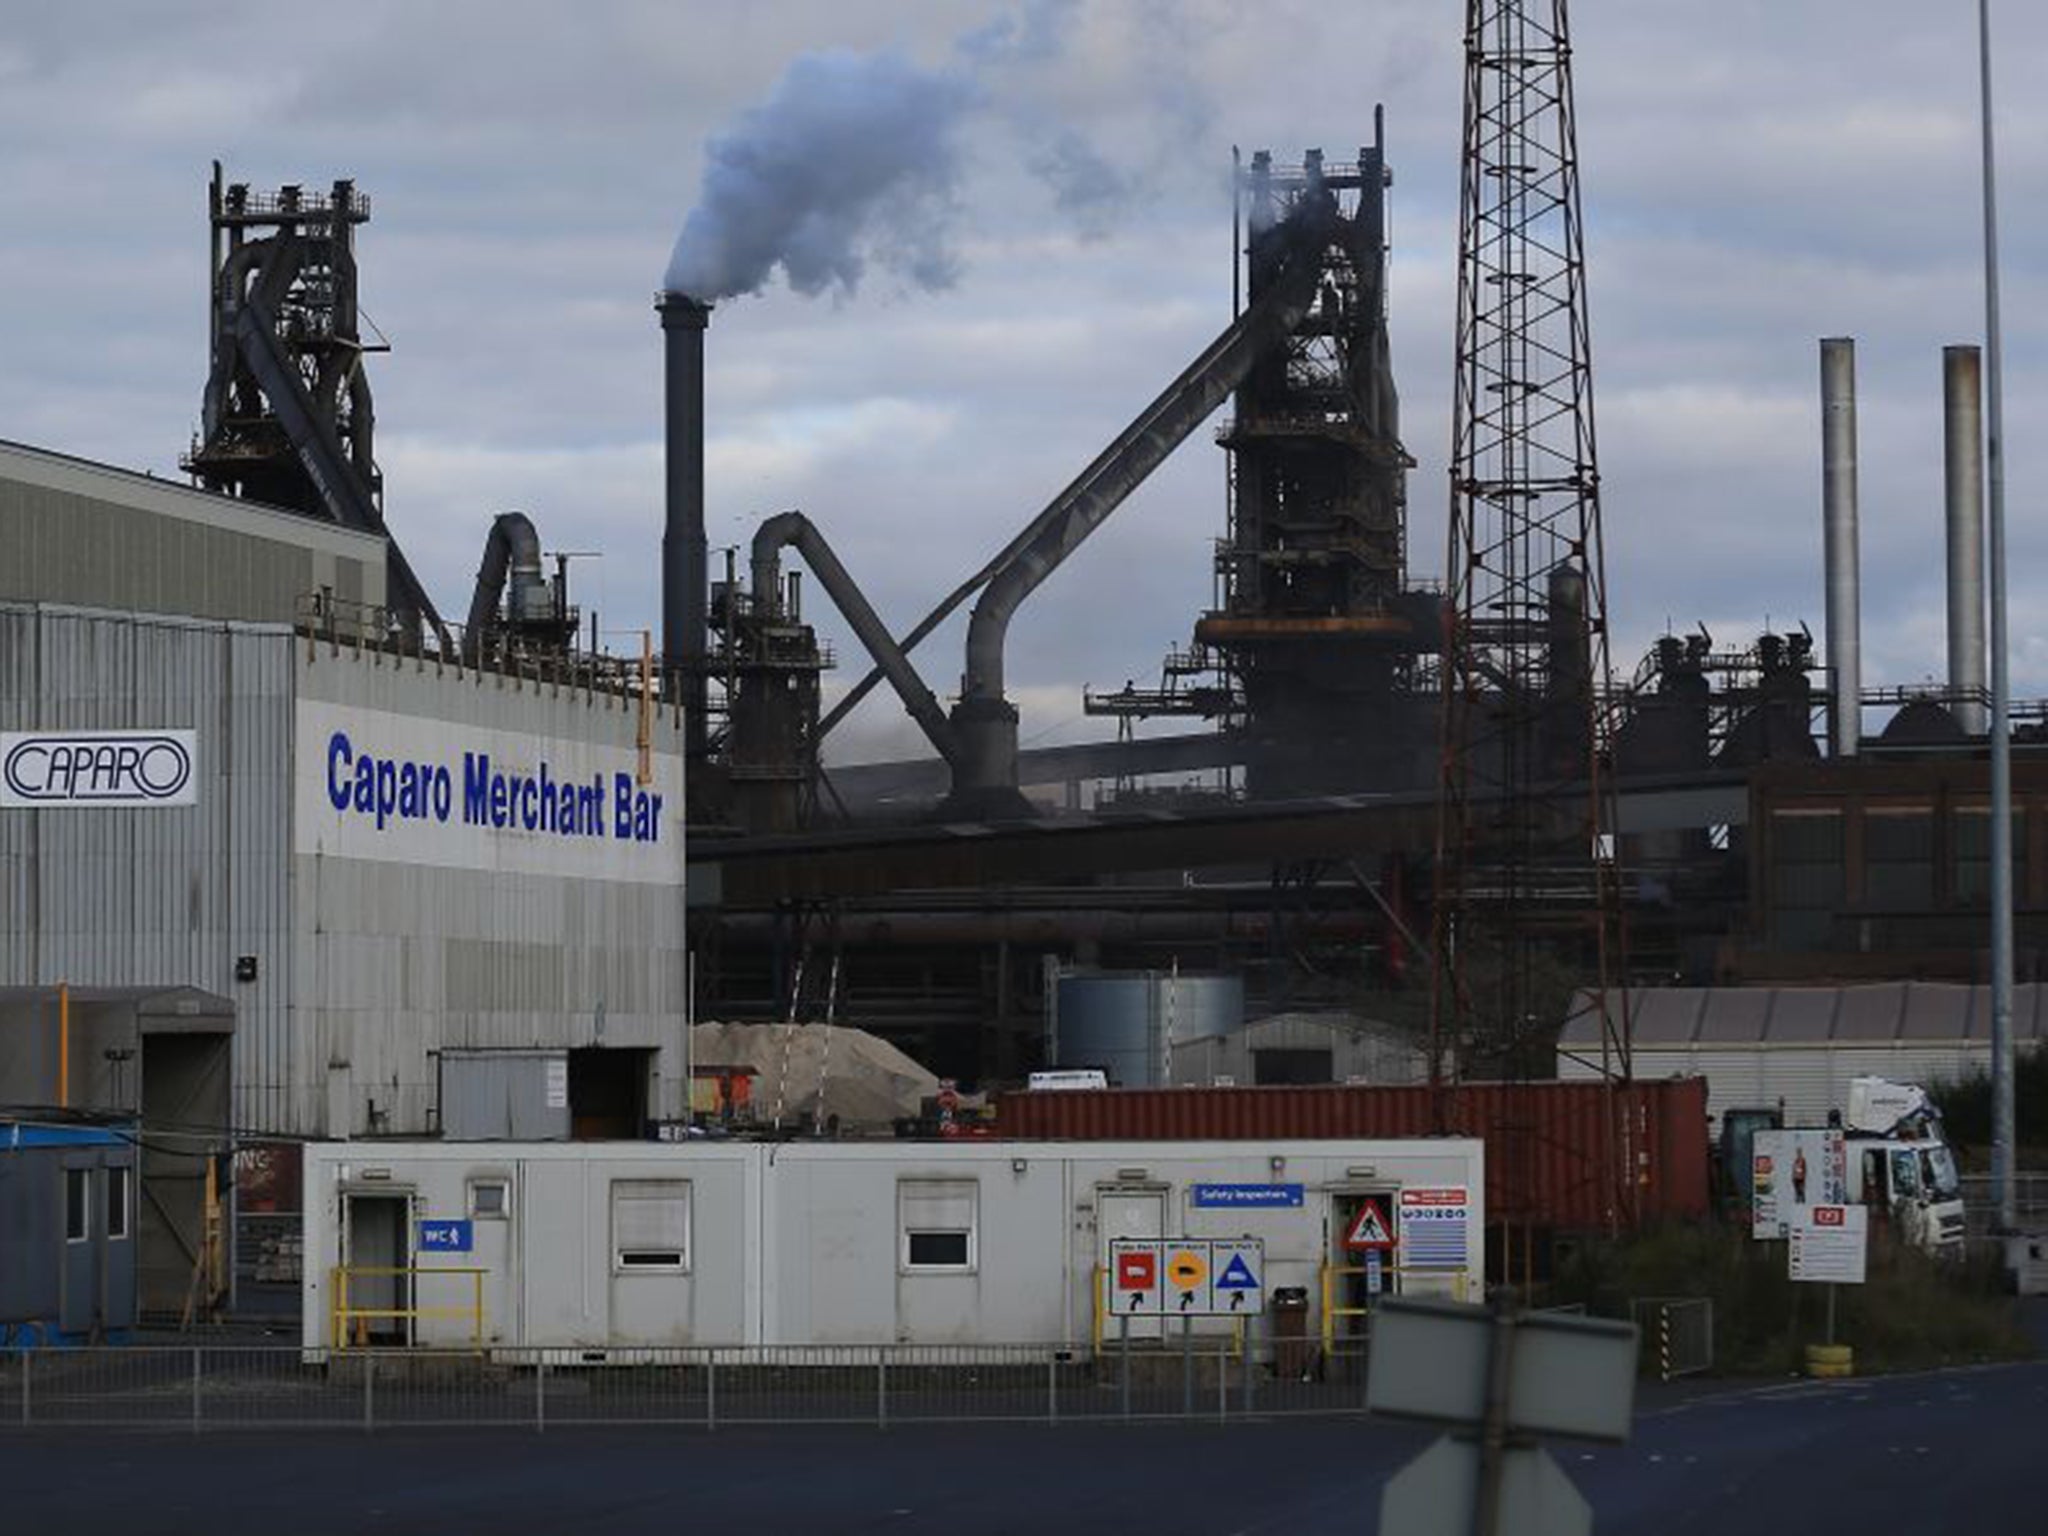 Caparo, in the shadow of the Tata Steel processing plant in Scunthorpe